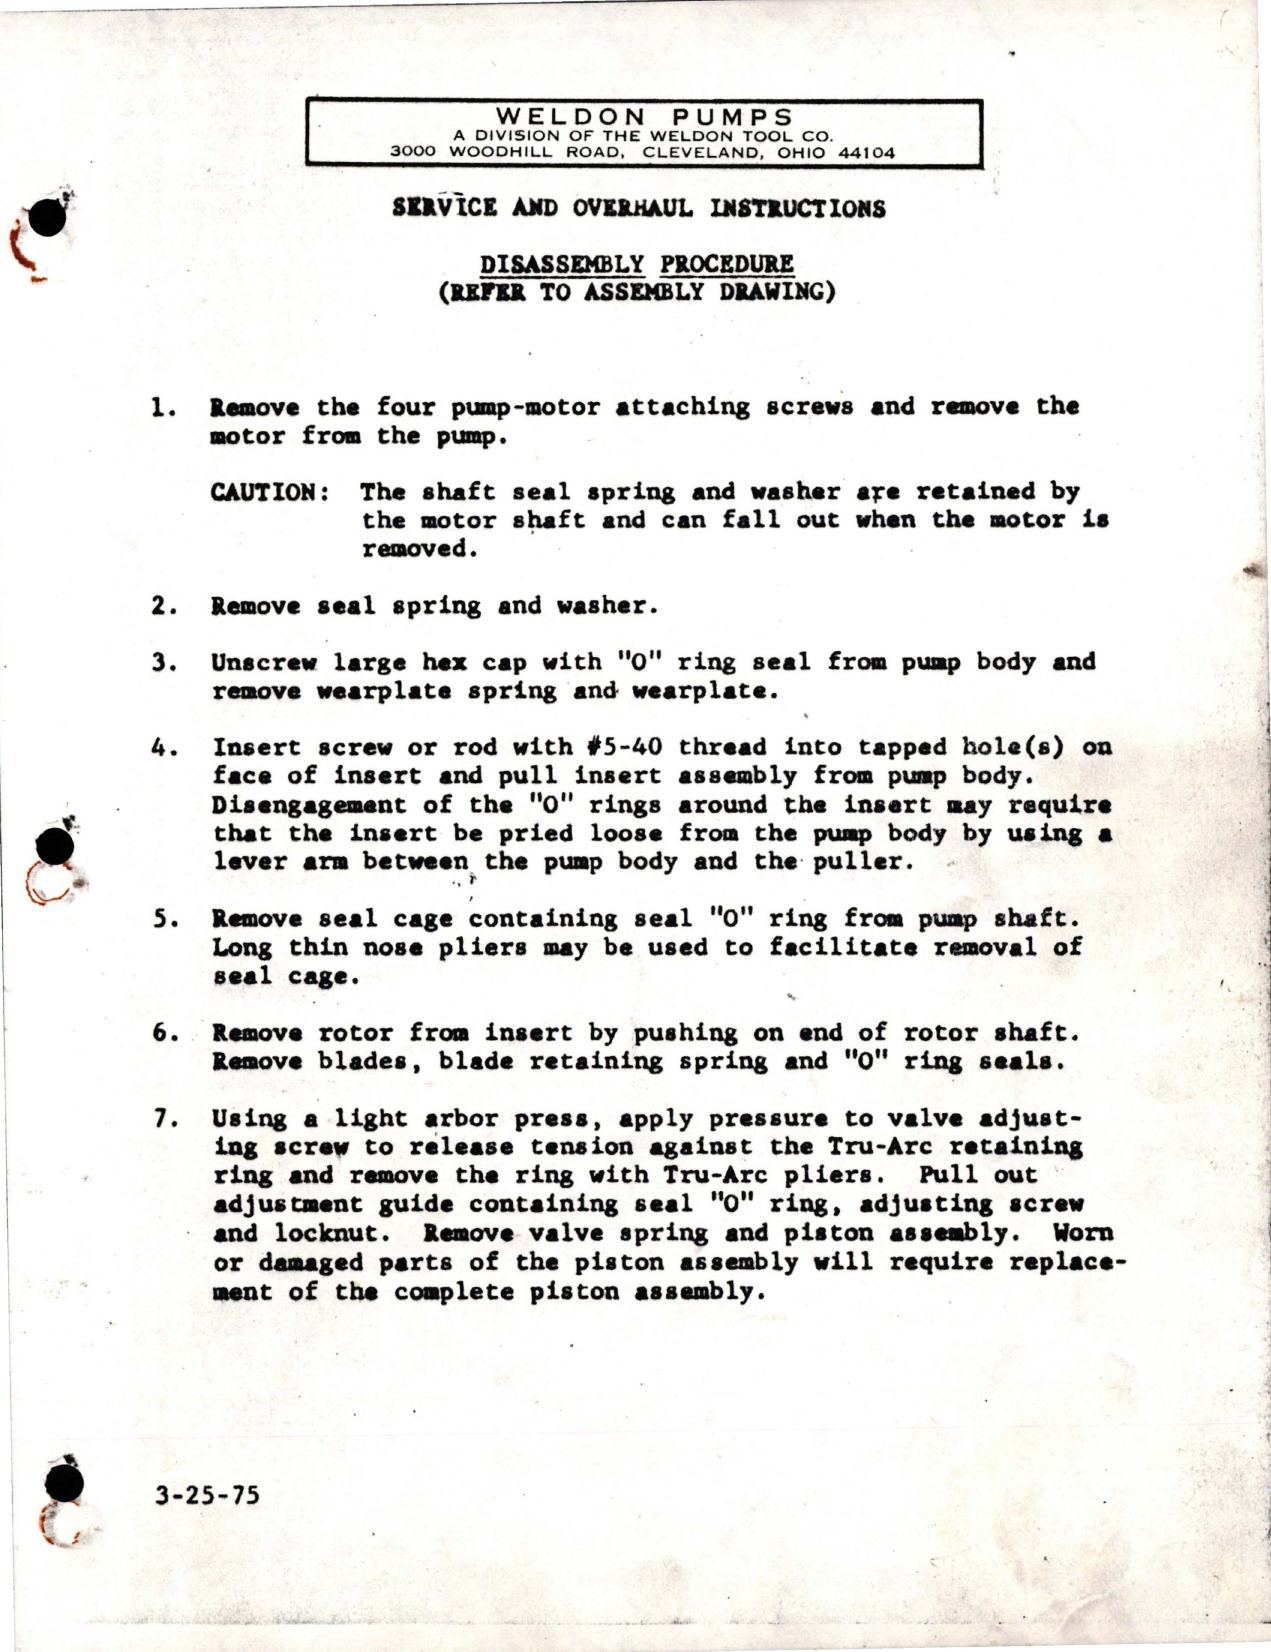 Sample page 1 from AirCorps Library document: Service and Overhaul Instructions for Disassembly Procedure for Pump Assembly